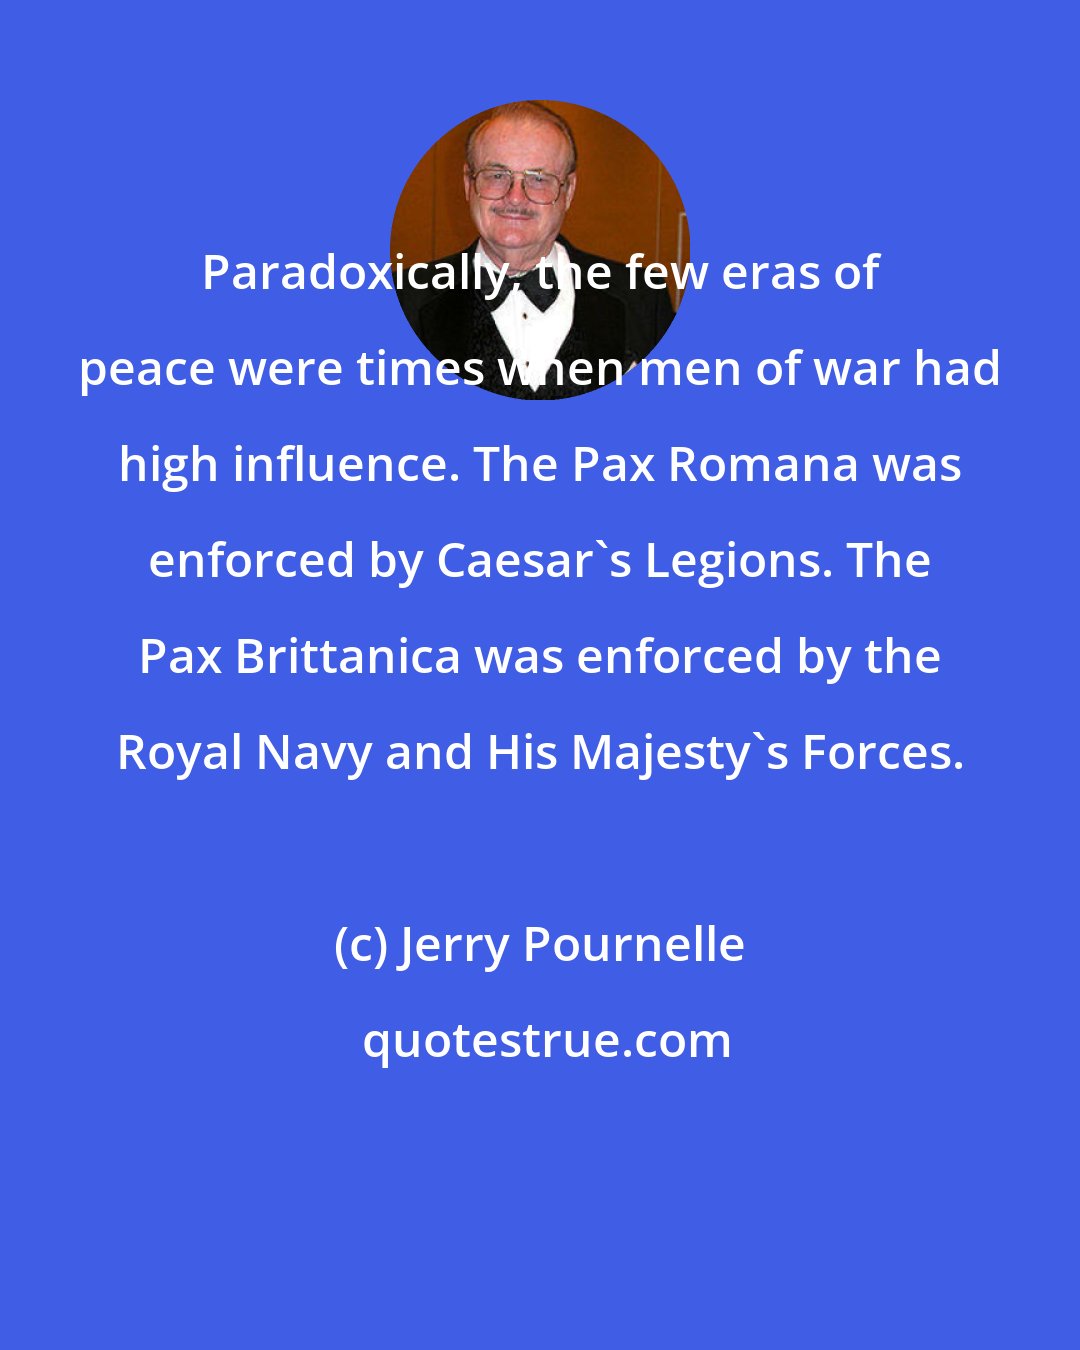 Jerry Pournelle: Paradoxically, the few eras of peace were times when men of war had high influence. The Pax Romana was enforced by Caesar's Legions. The Pax Brittanica was enforced by the Royal Navy and His Majesty's Forces.